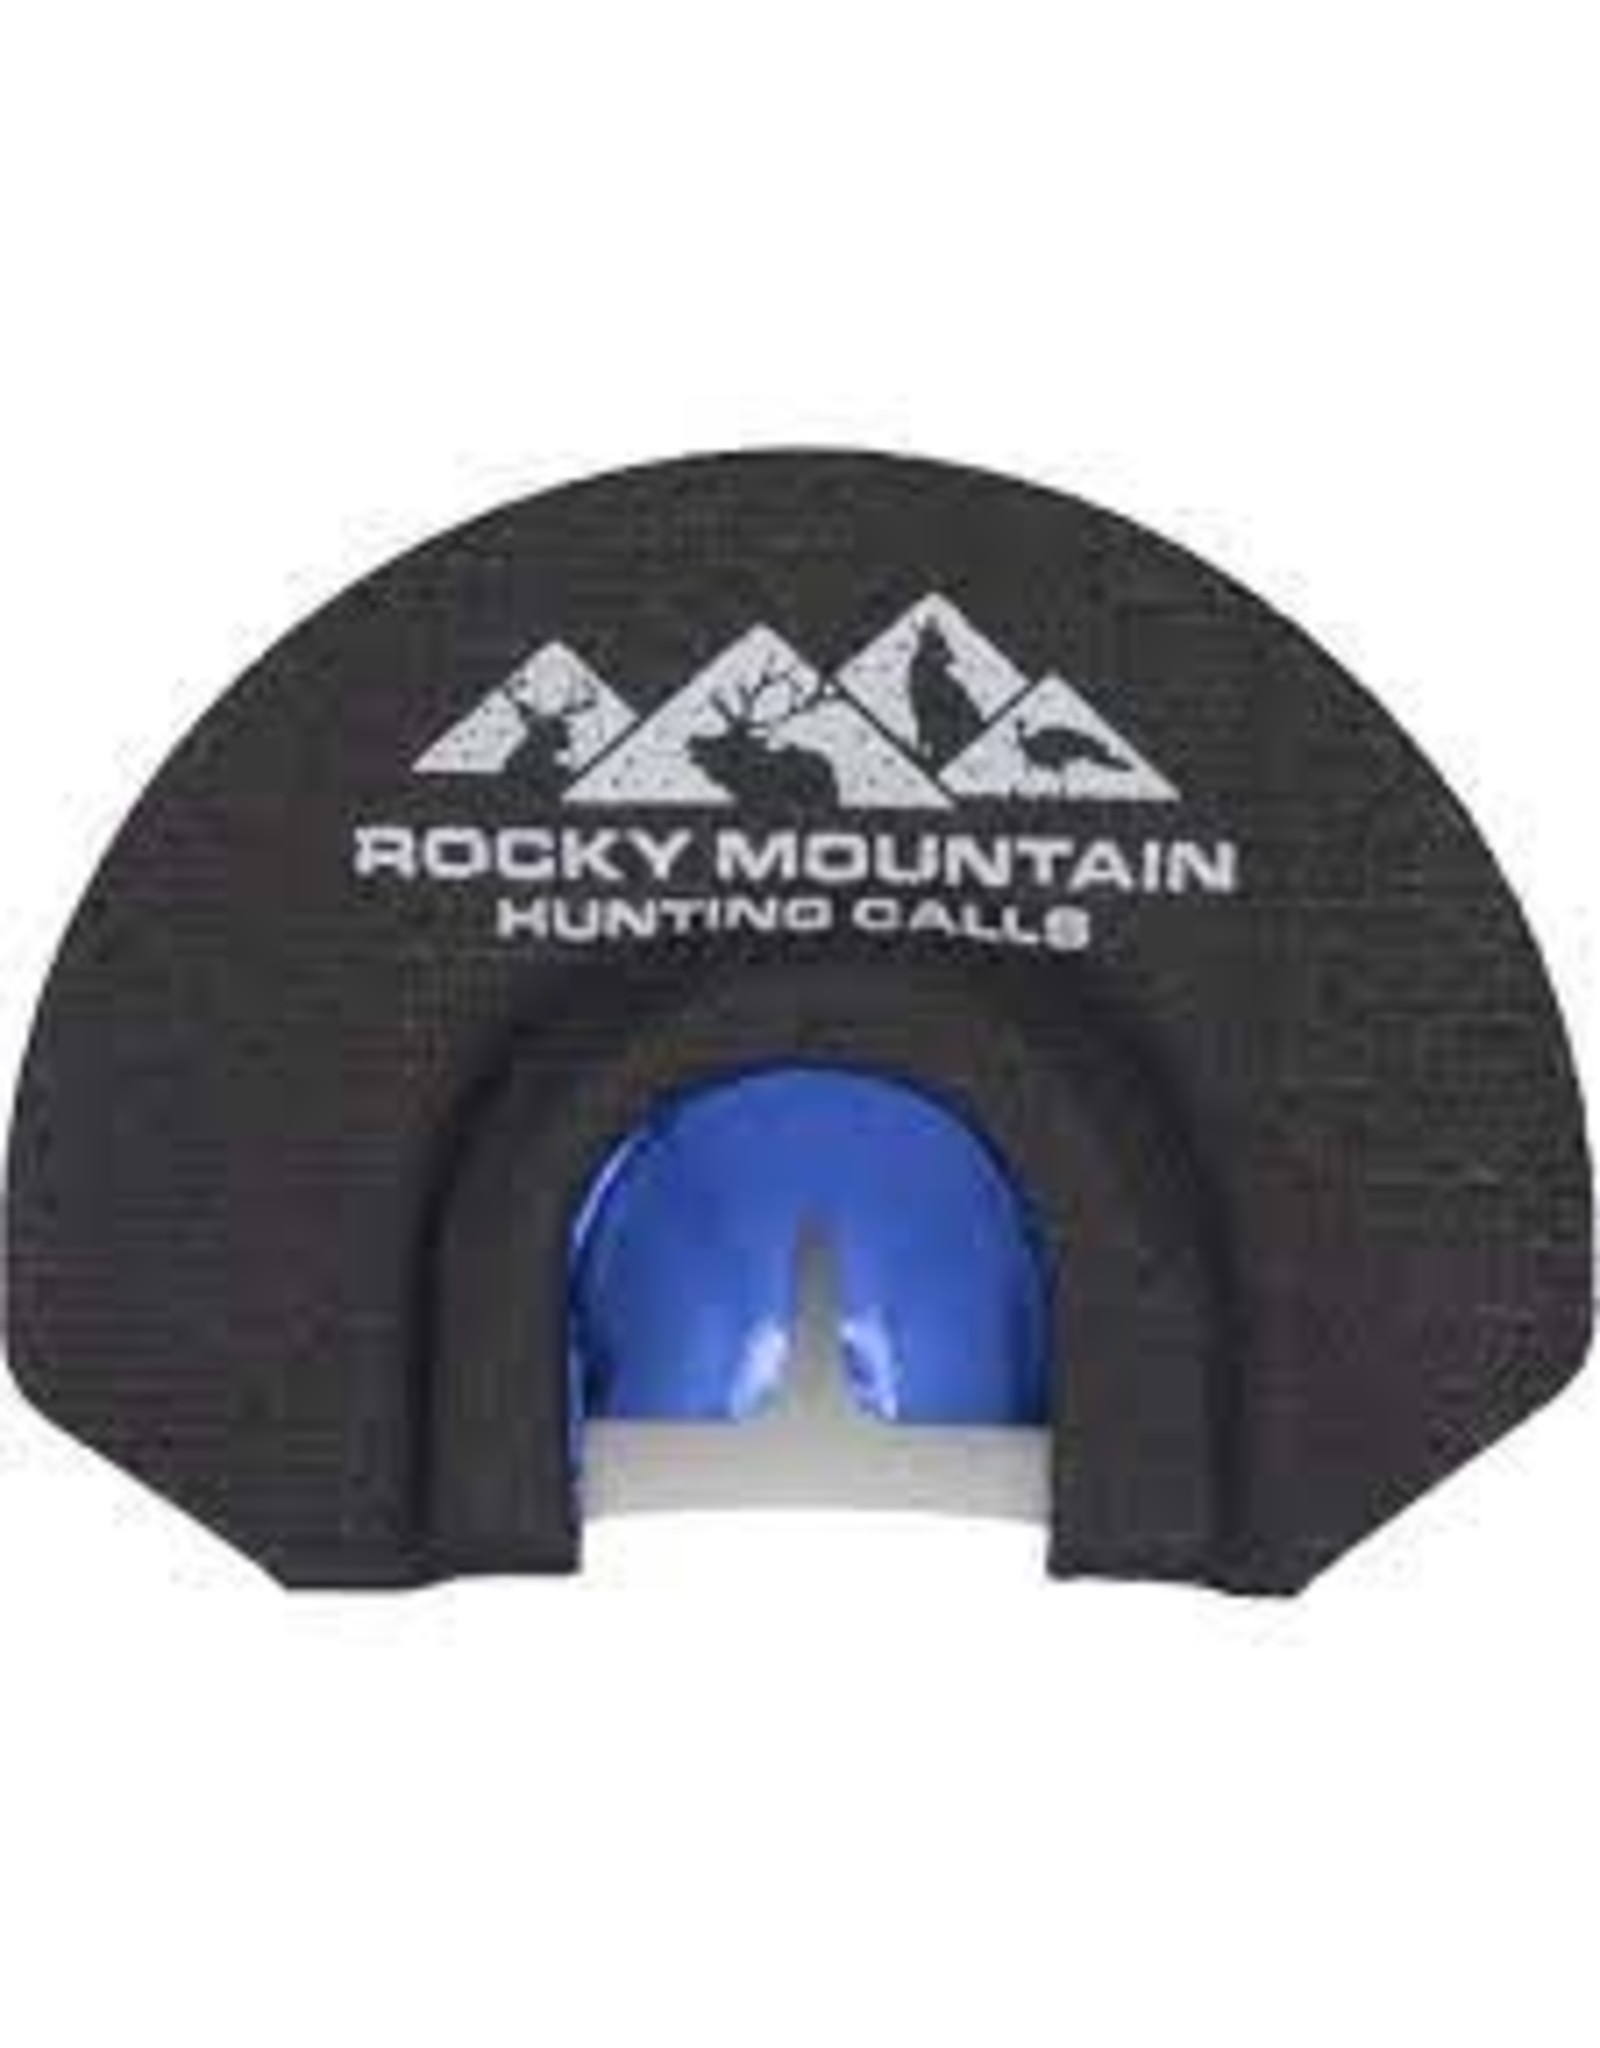 ROCKY MOUNTAIN HUNTING CALLS RMHC "TST" 2.0 DIAPHRAGM MOUTH REED